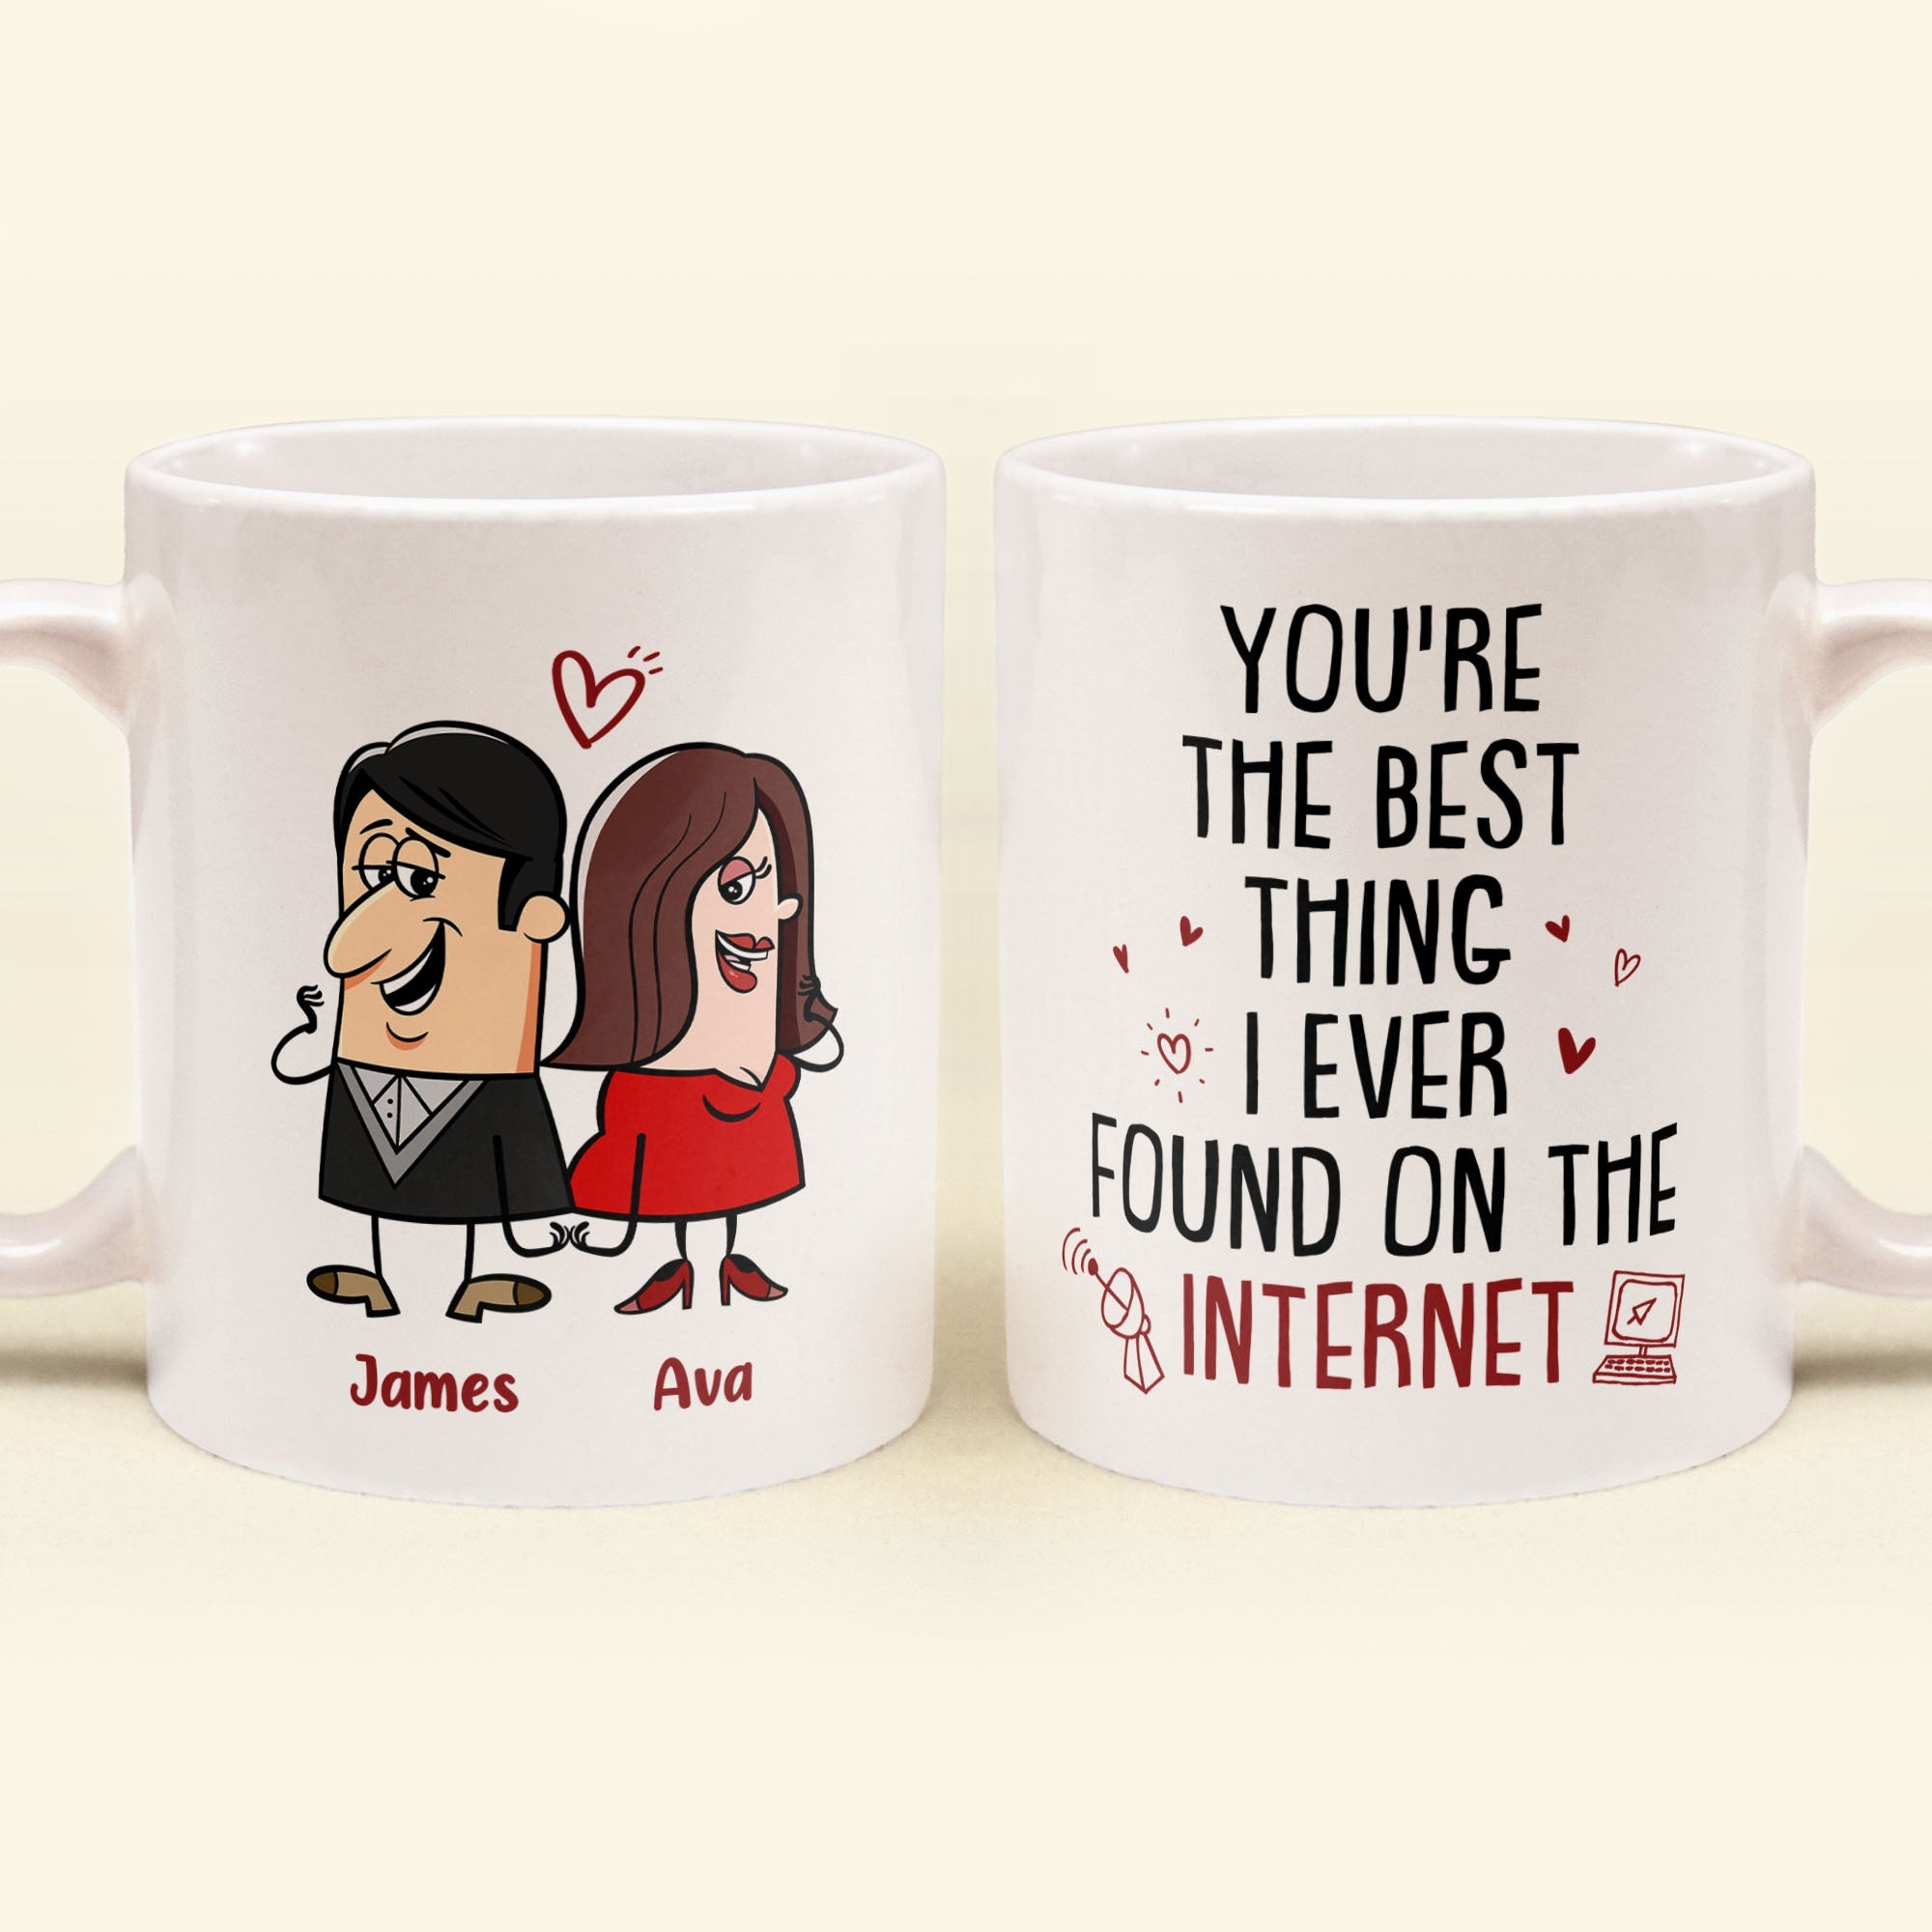 http://macorner.co/cdn/shop/files/You-Are-The-Best-Thing-I-Ever-Found-On-The-Internet-Personalized-Mug_1_9100ca42-f08a-488b-9439-565cdf1dd046.jpg?v=1685594351